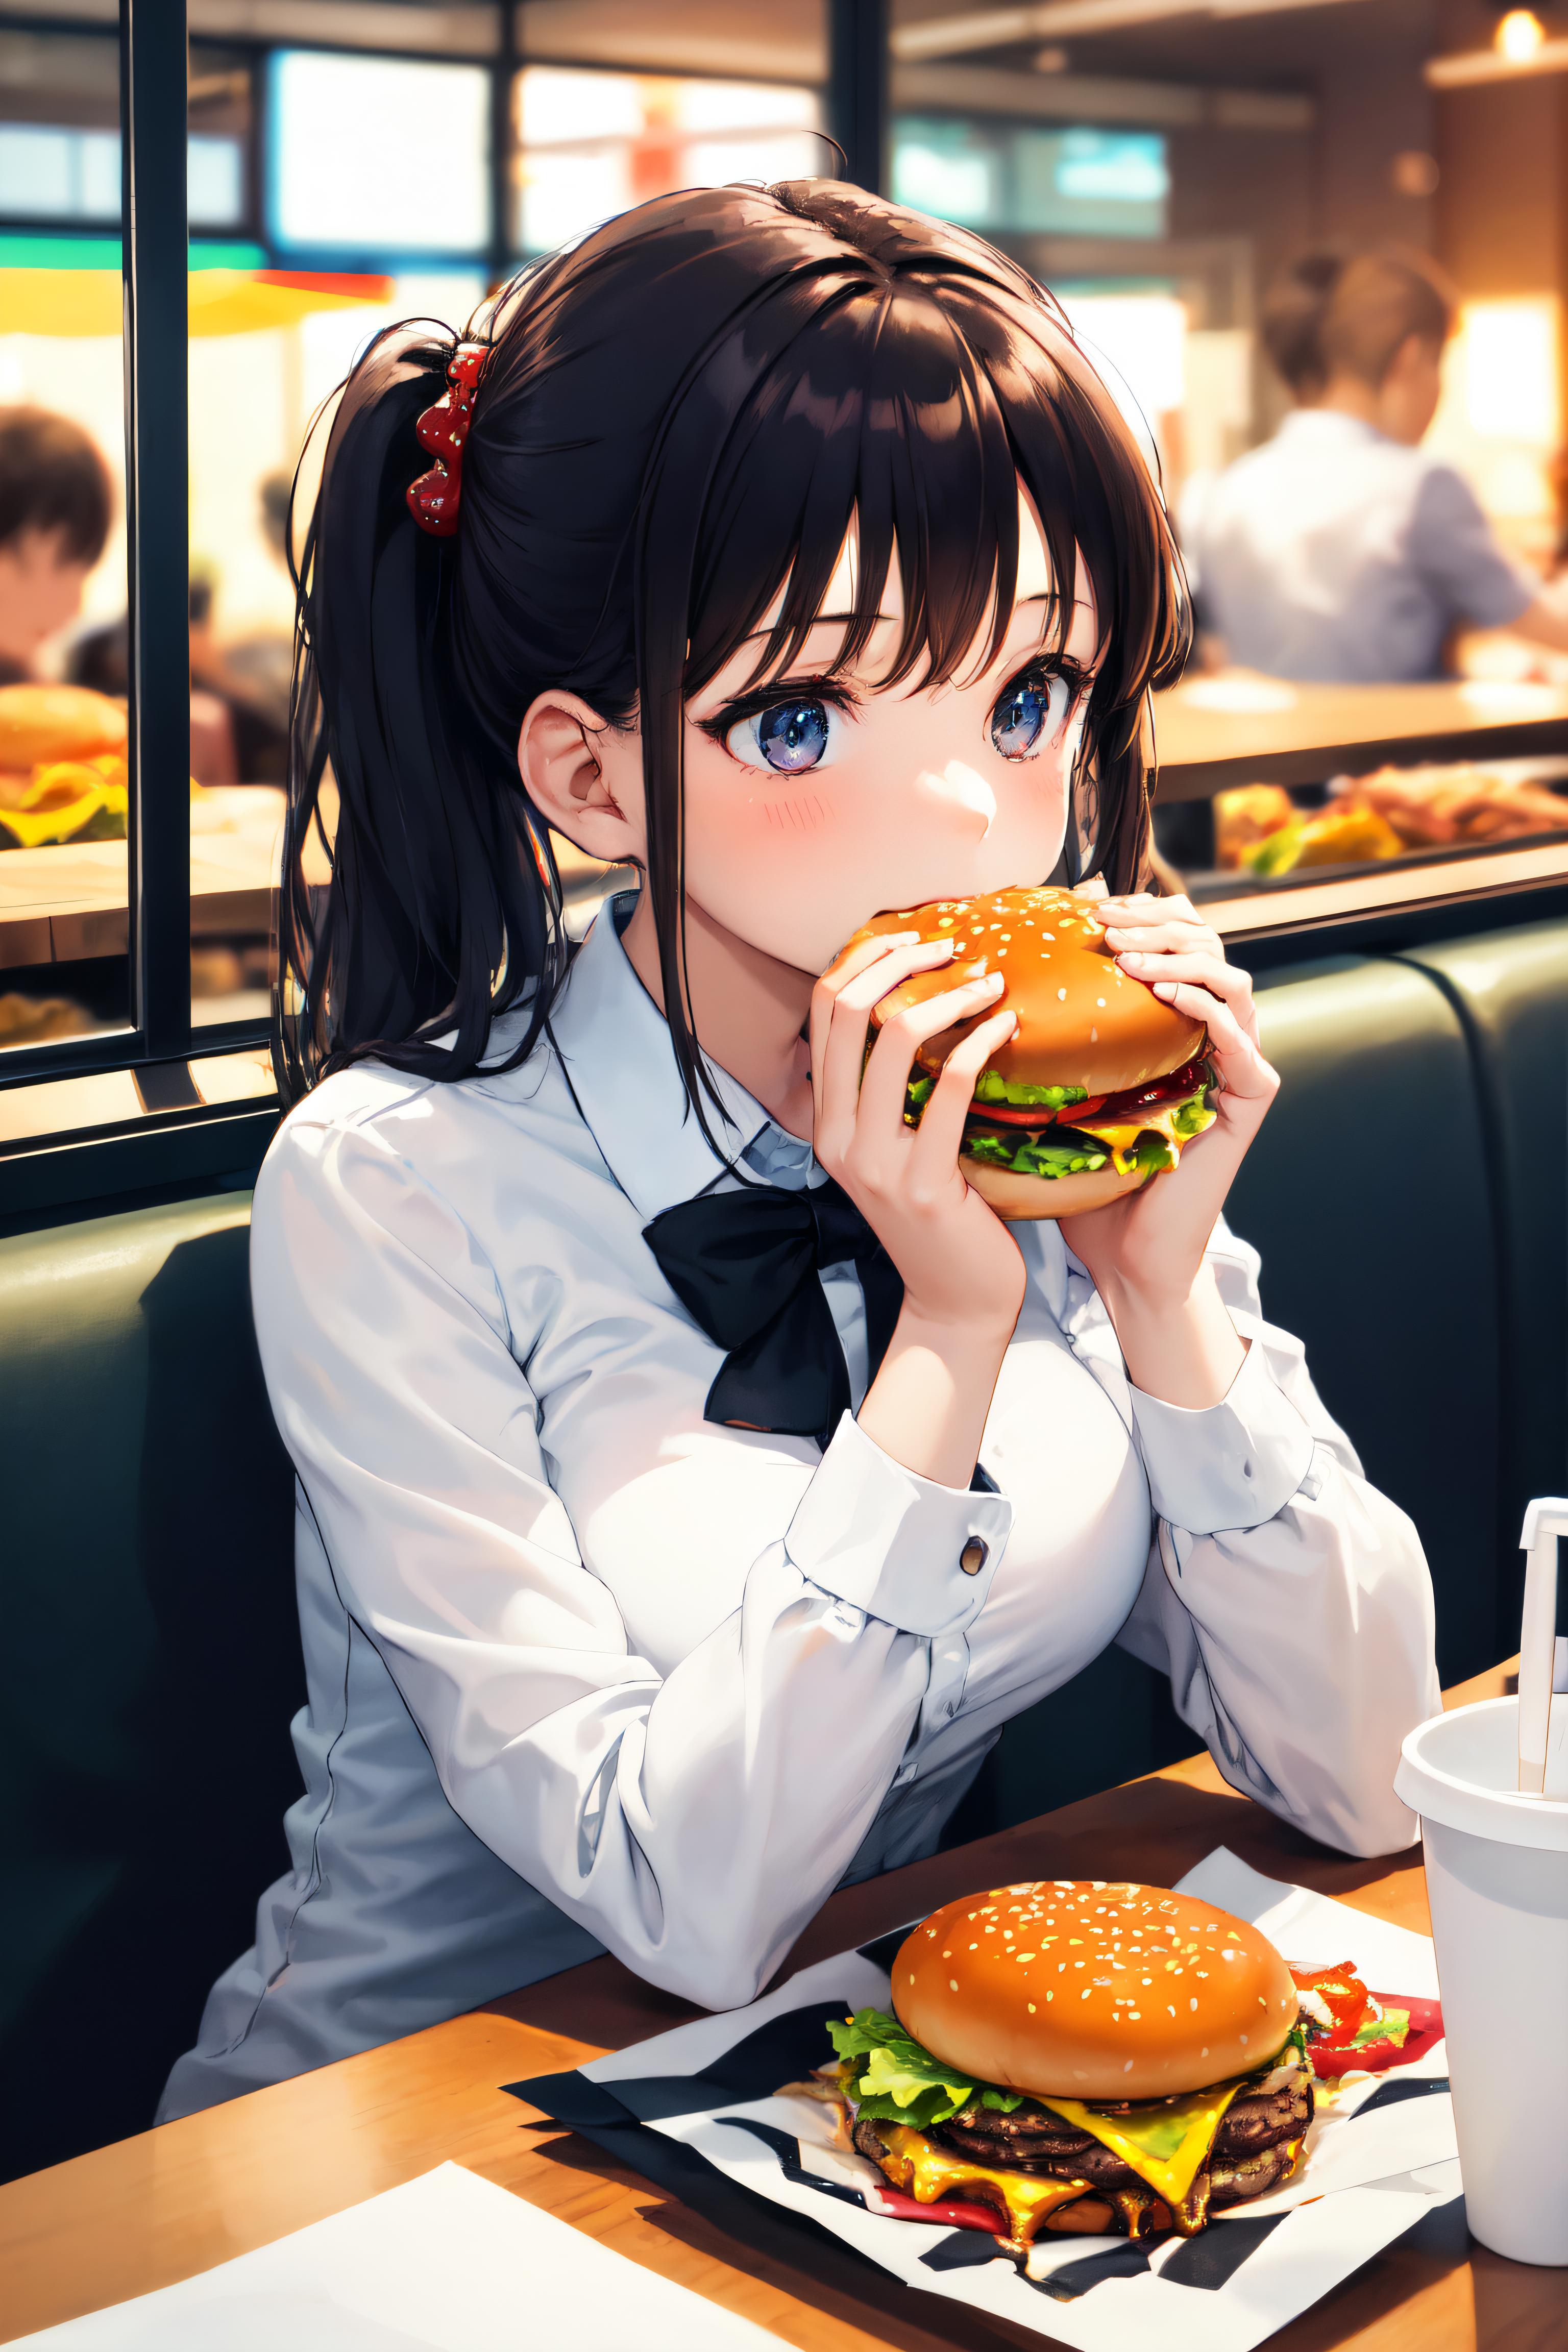 Huge Two-Handed Burger LoRA image by Gladas